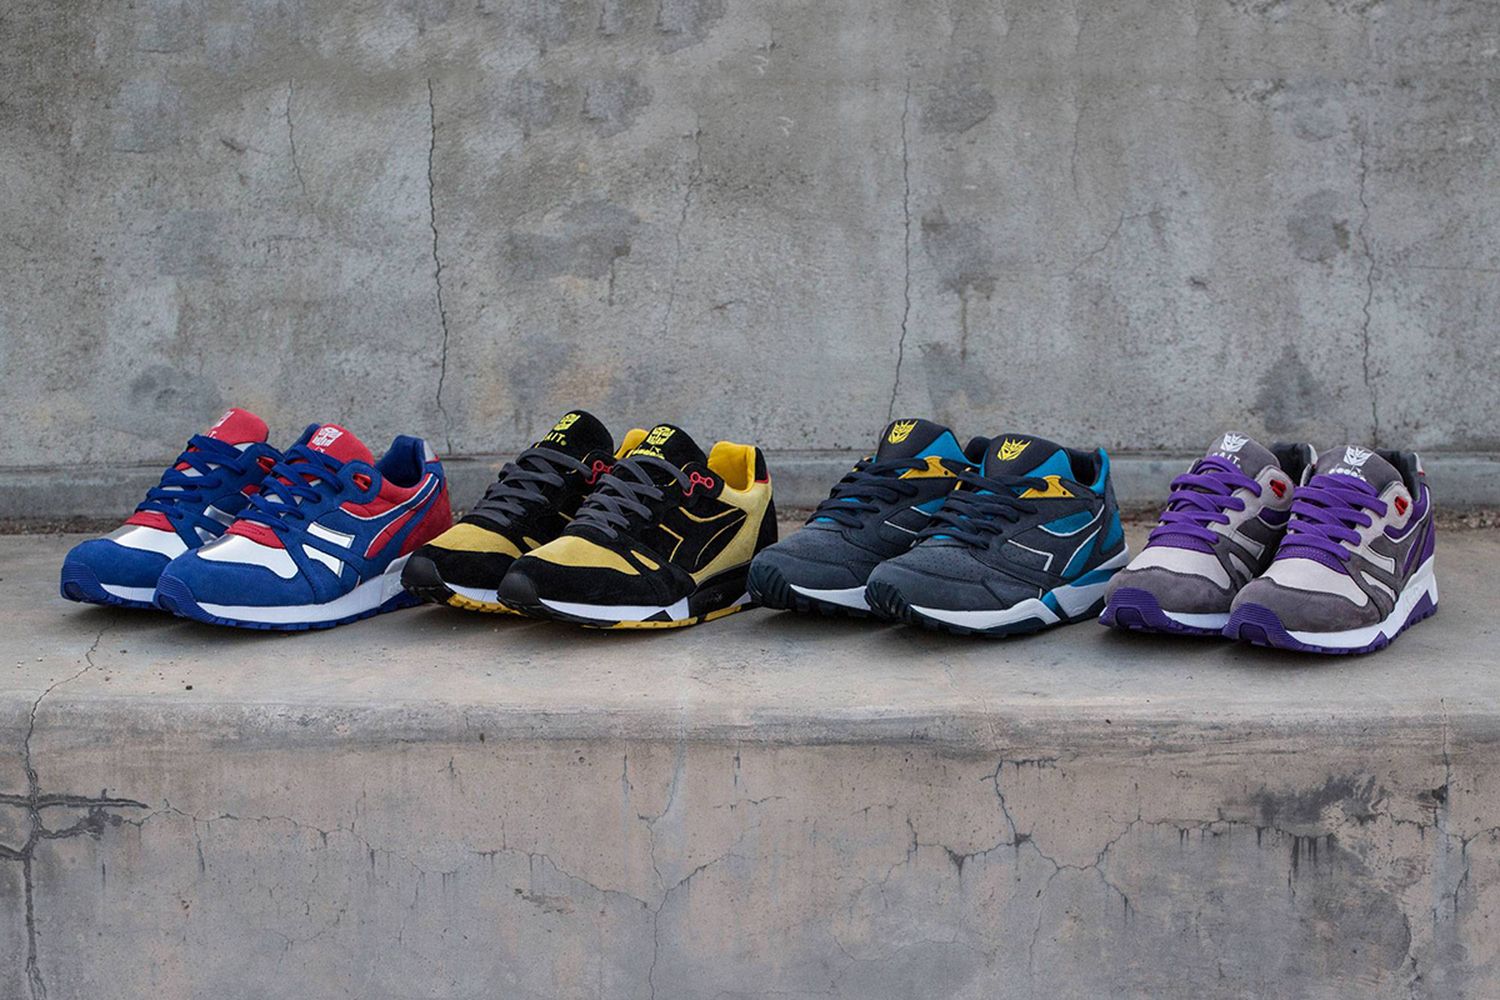 'Transformers' Pack